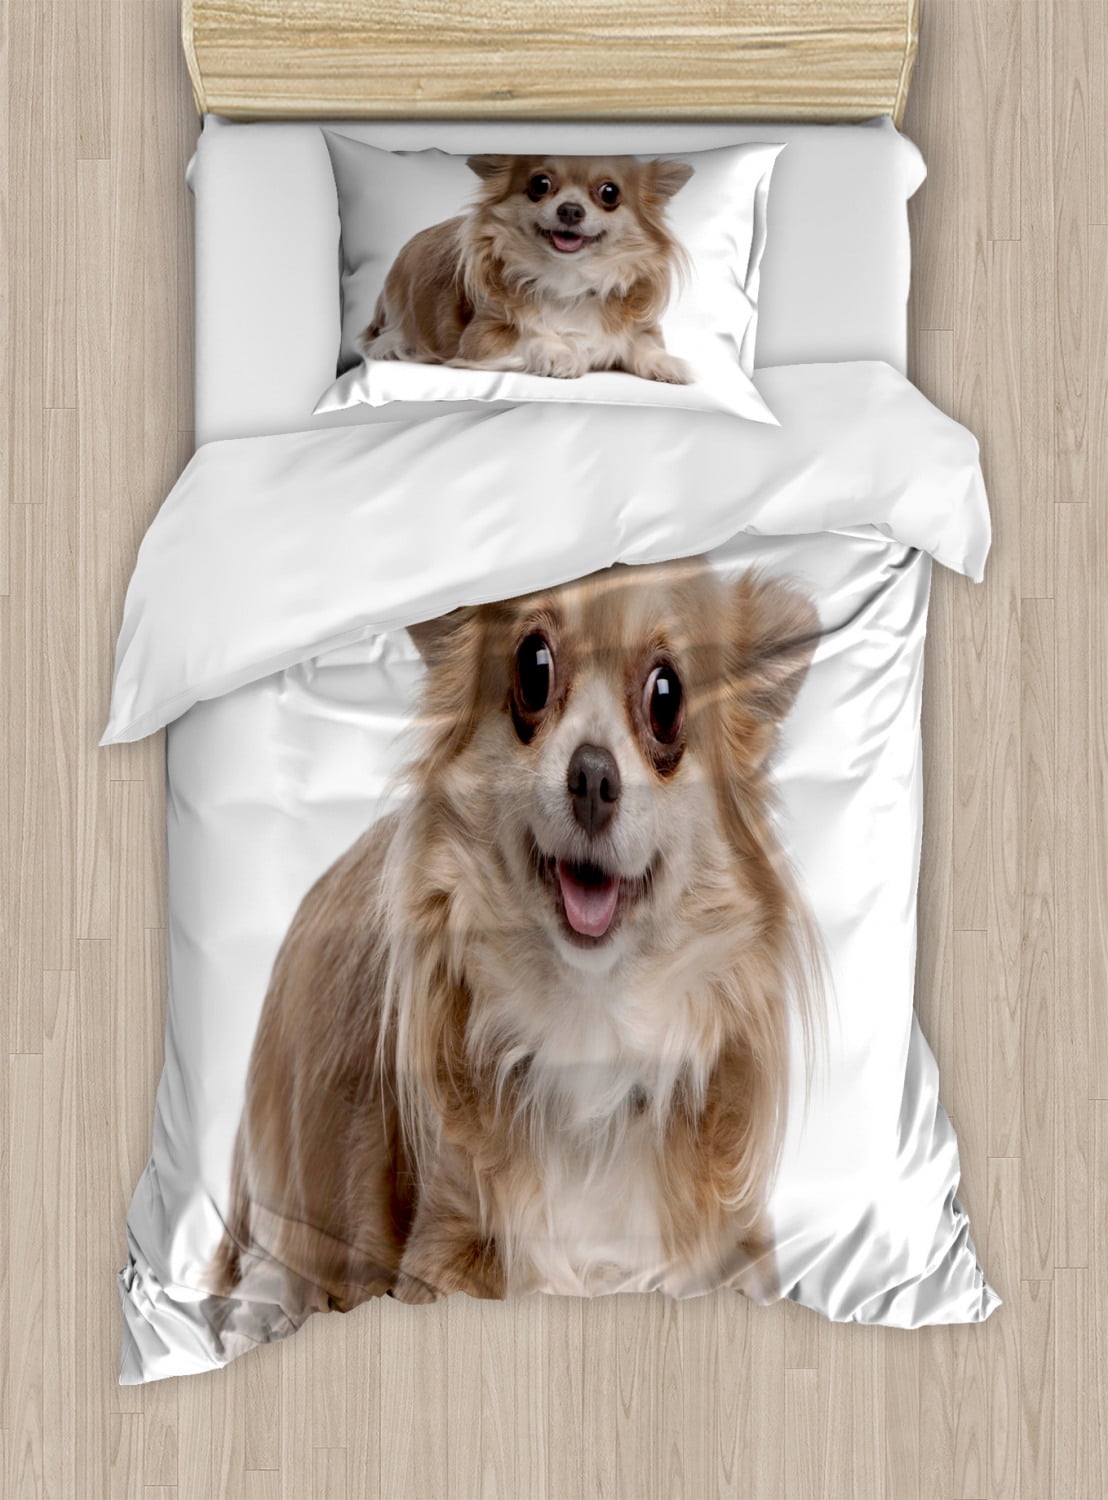 Chihuahua Duvet Cover Set Plain Backgorund Photo Of Funny Puppy